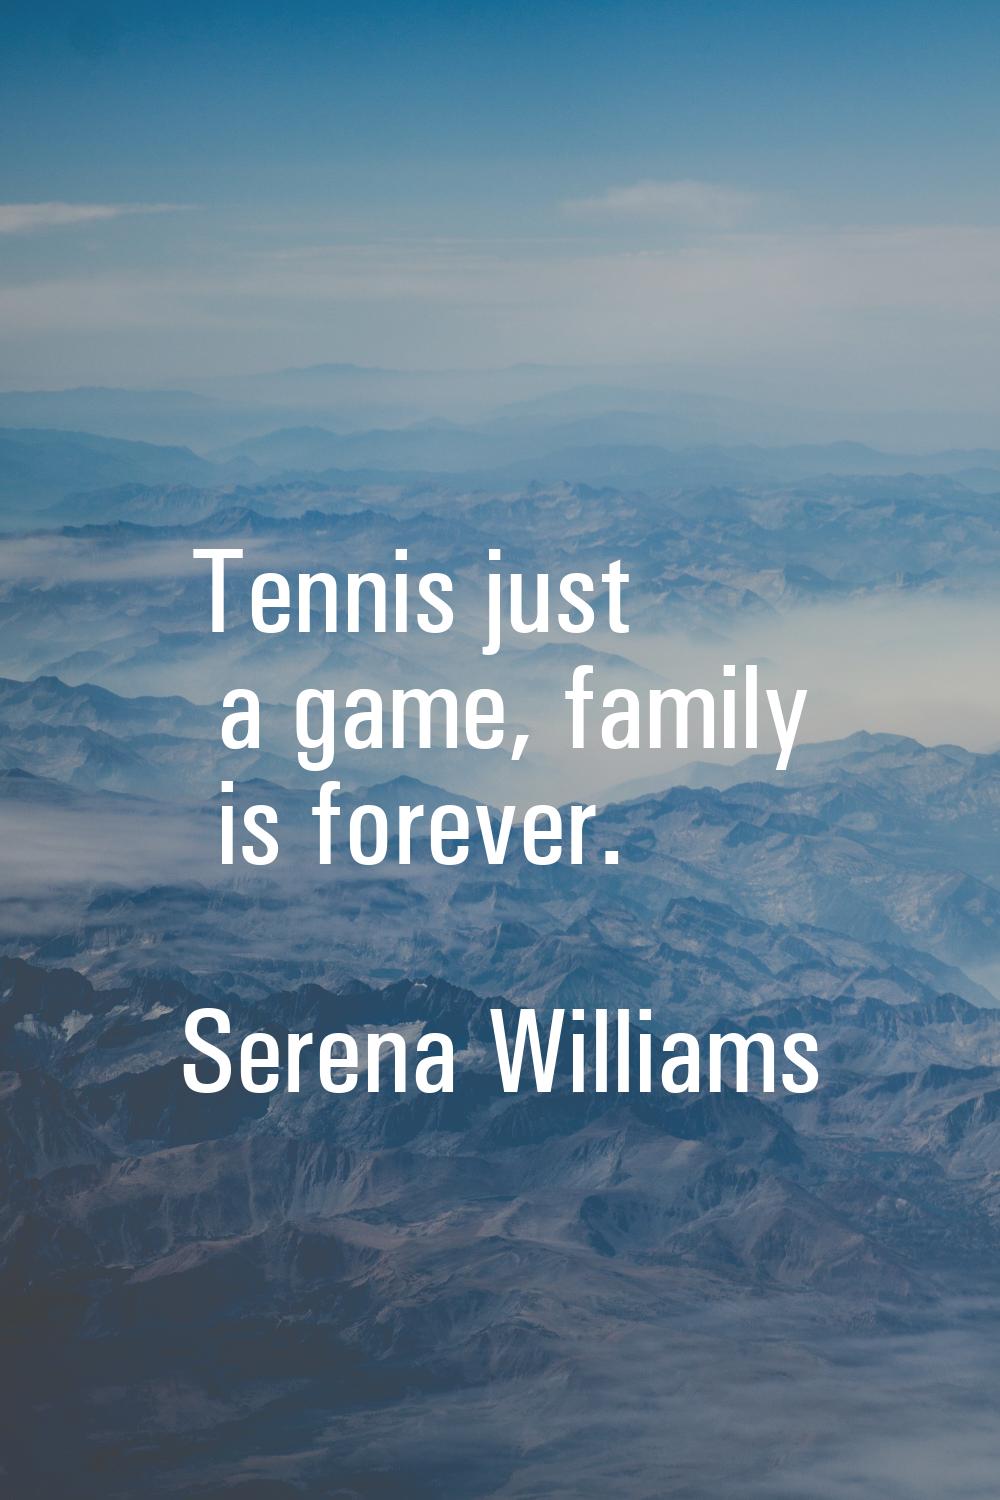 Tennis just a game, family is forever.